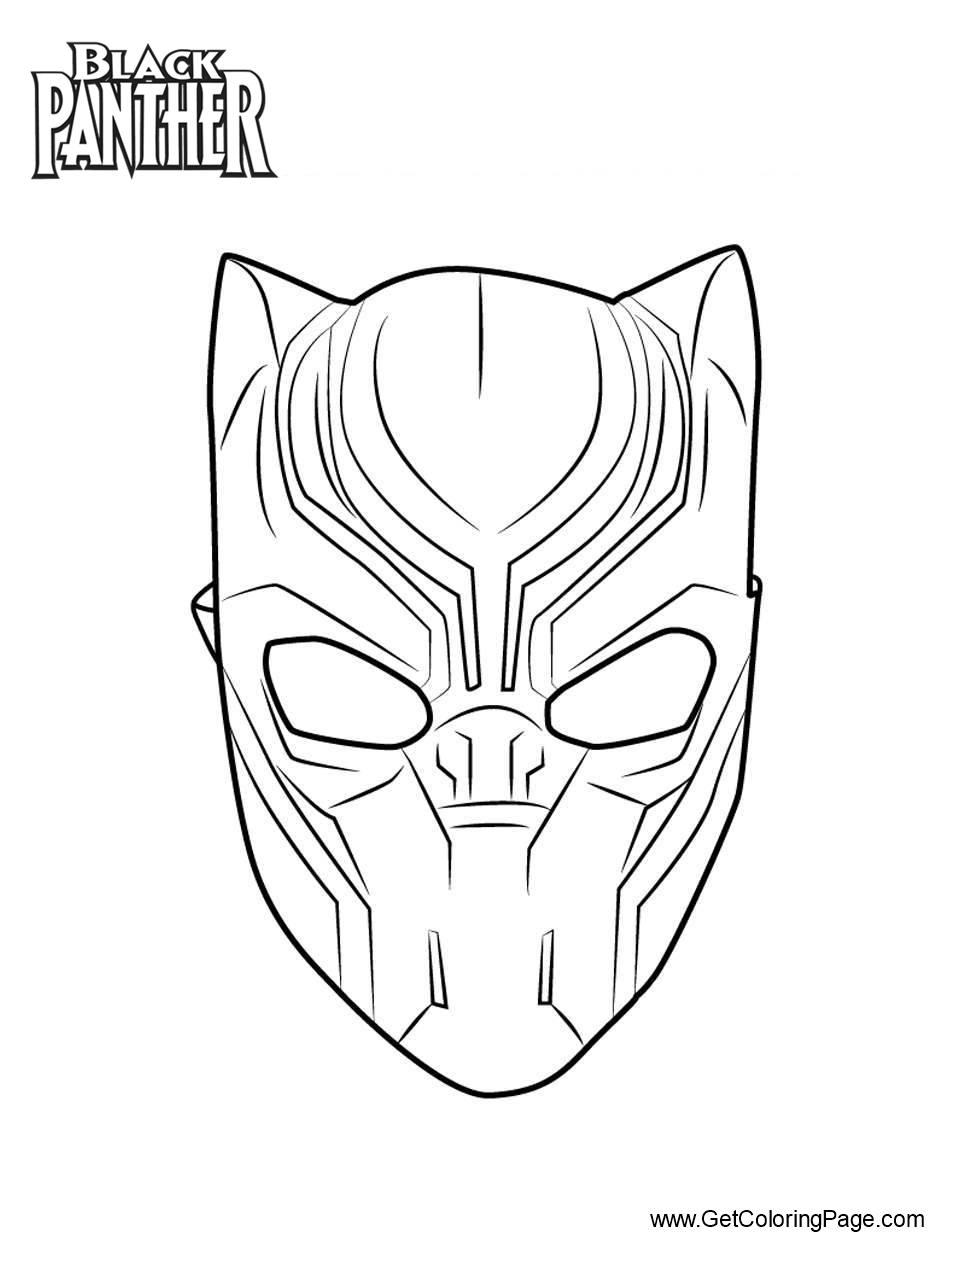 Black Panther Mask Coloring Page Free Printable Coloring Pages For Kids